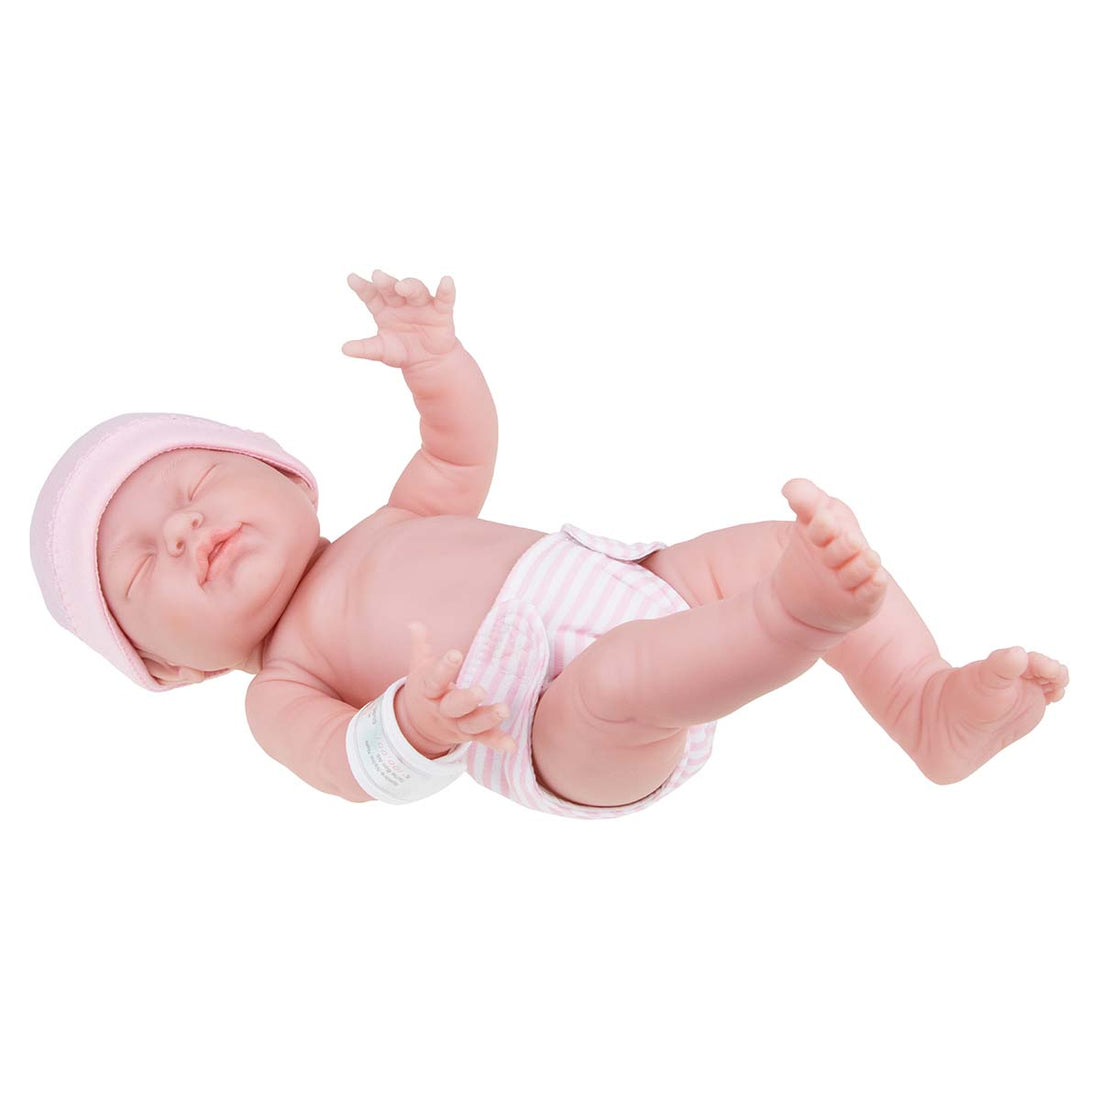 La Newborn All-Vinyl Baby Doll in Pink Set with closed eyes and accessories